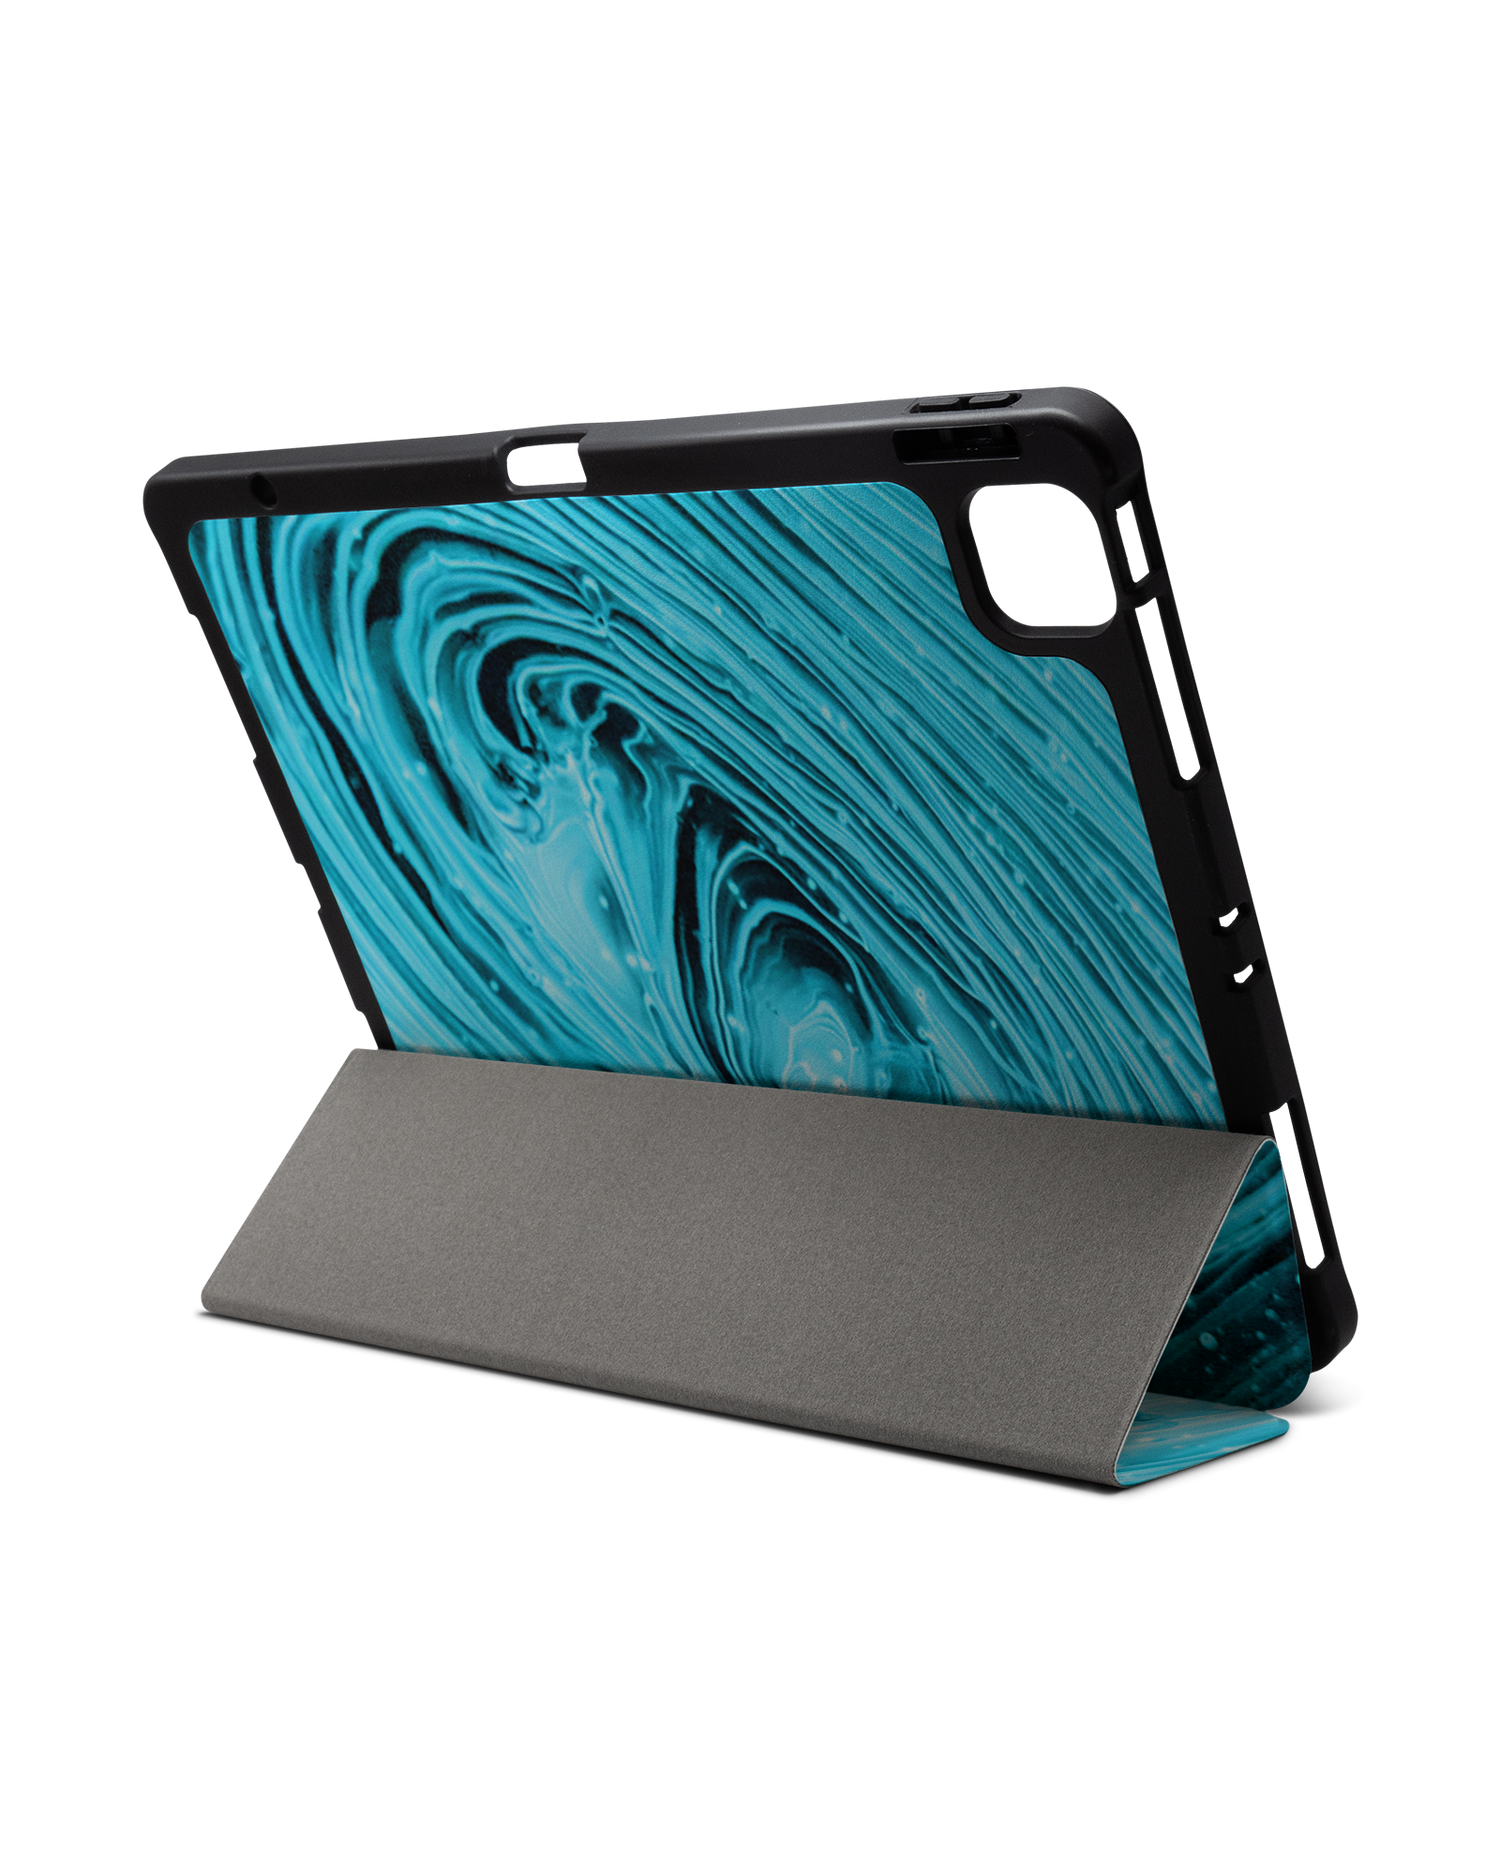 Turquoise Ripples iPad Case with Pencil Holder for Apple iPad Pro 6 12.9